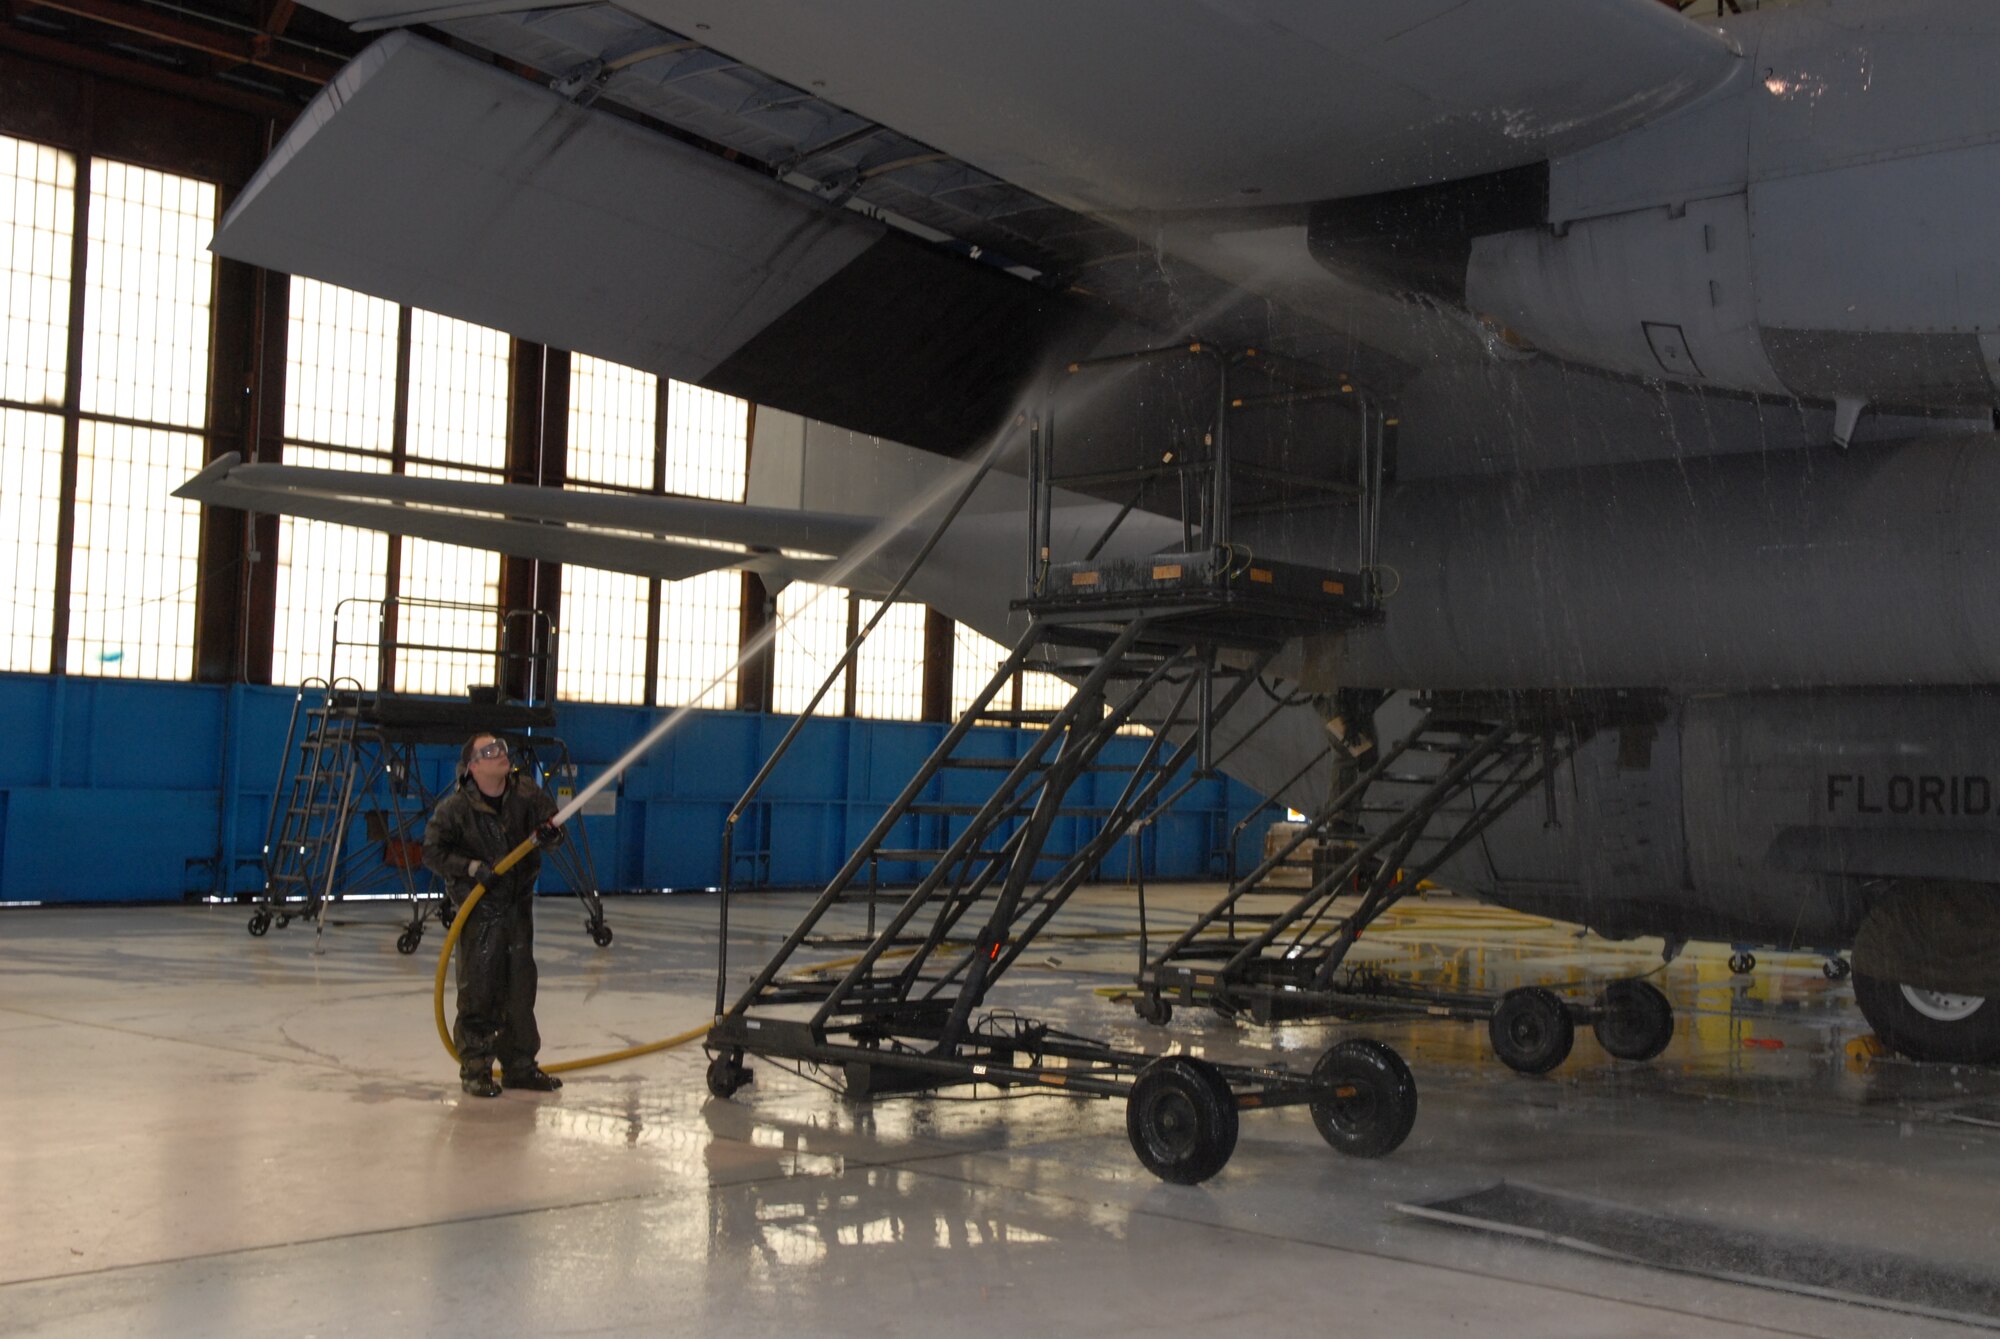 Tech. Sgt. Adam Mace of the 130th Aircraft Maintenance Squadron at Yeager Airport, W.Va. sprays down the underside of a wing on a WC-130H Hercules plane, Friday, Jan. 8, 2010. It took nine hours for a crew of four airmen to soap up, scrub down and spray off the aircraft. Maintenance personnel wash each aircraft twice a year. (U.S. Air Force photo by Staff Sgt. William Hinamon/Released)